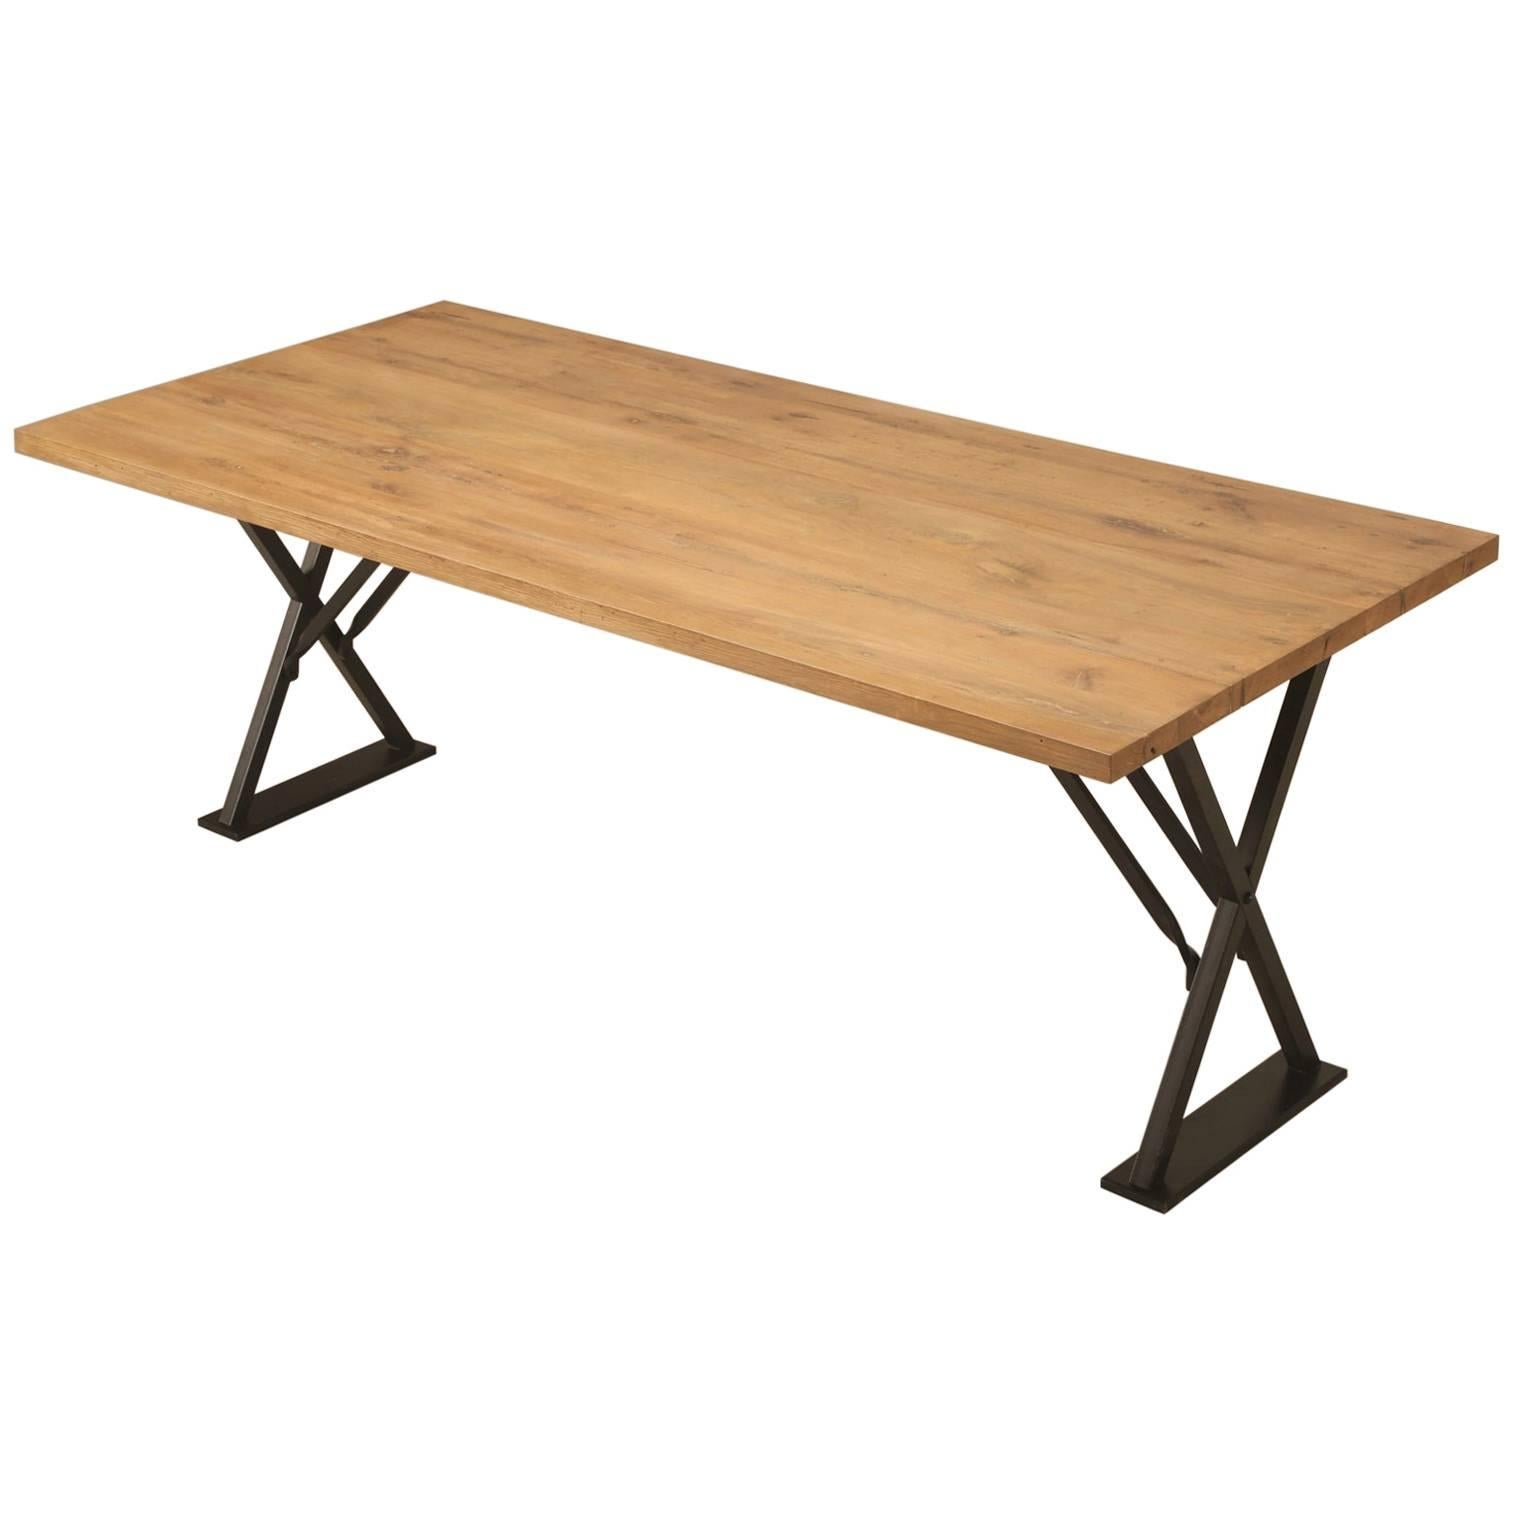 Industrial Inspired Kitchen Table from French White Oak and Steel by Old Plank